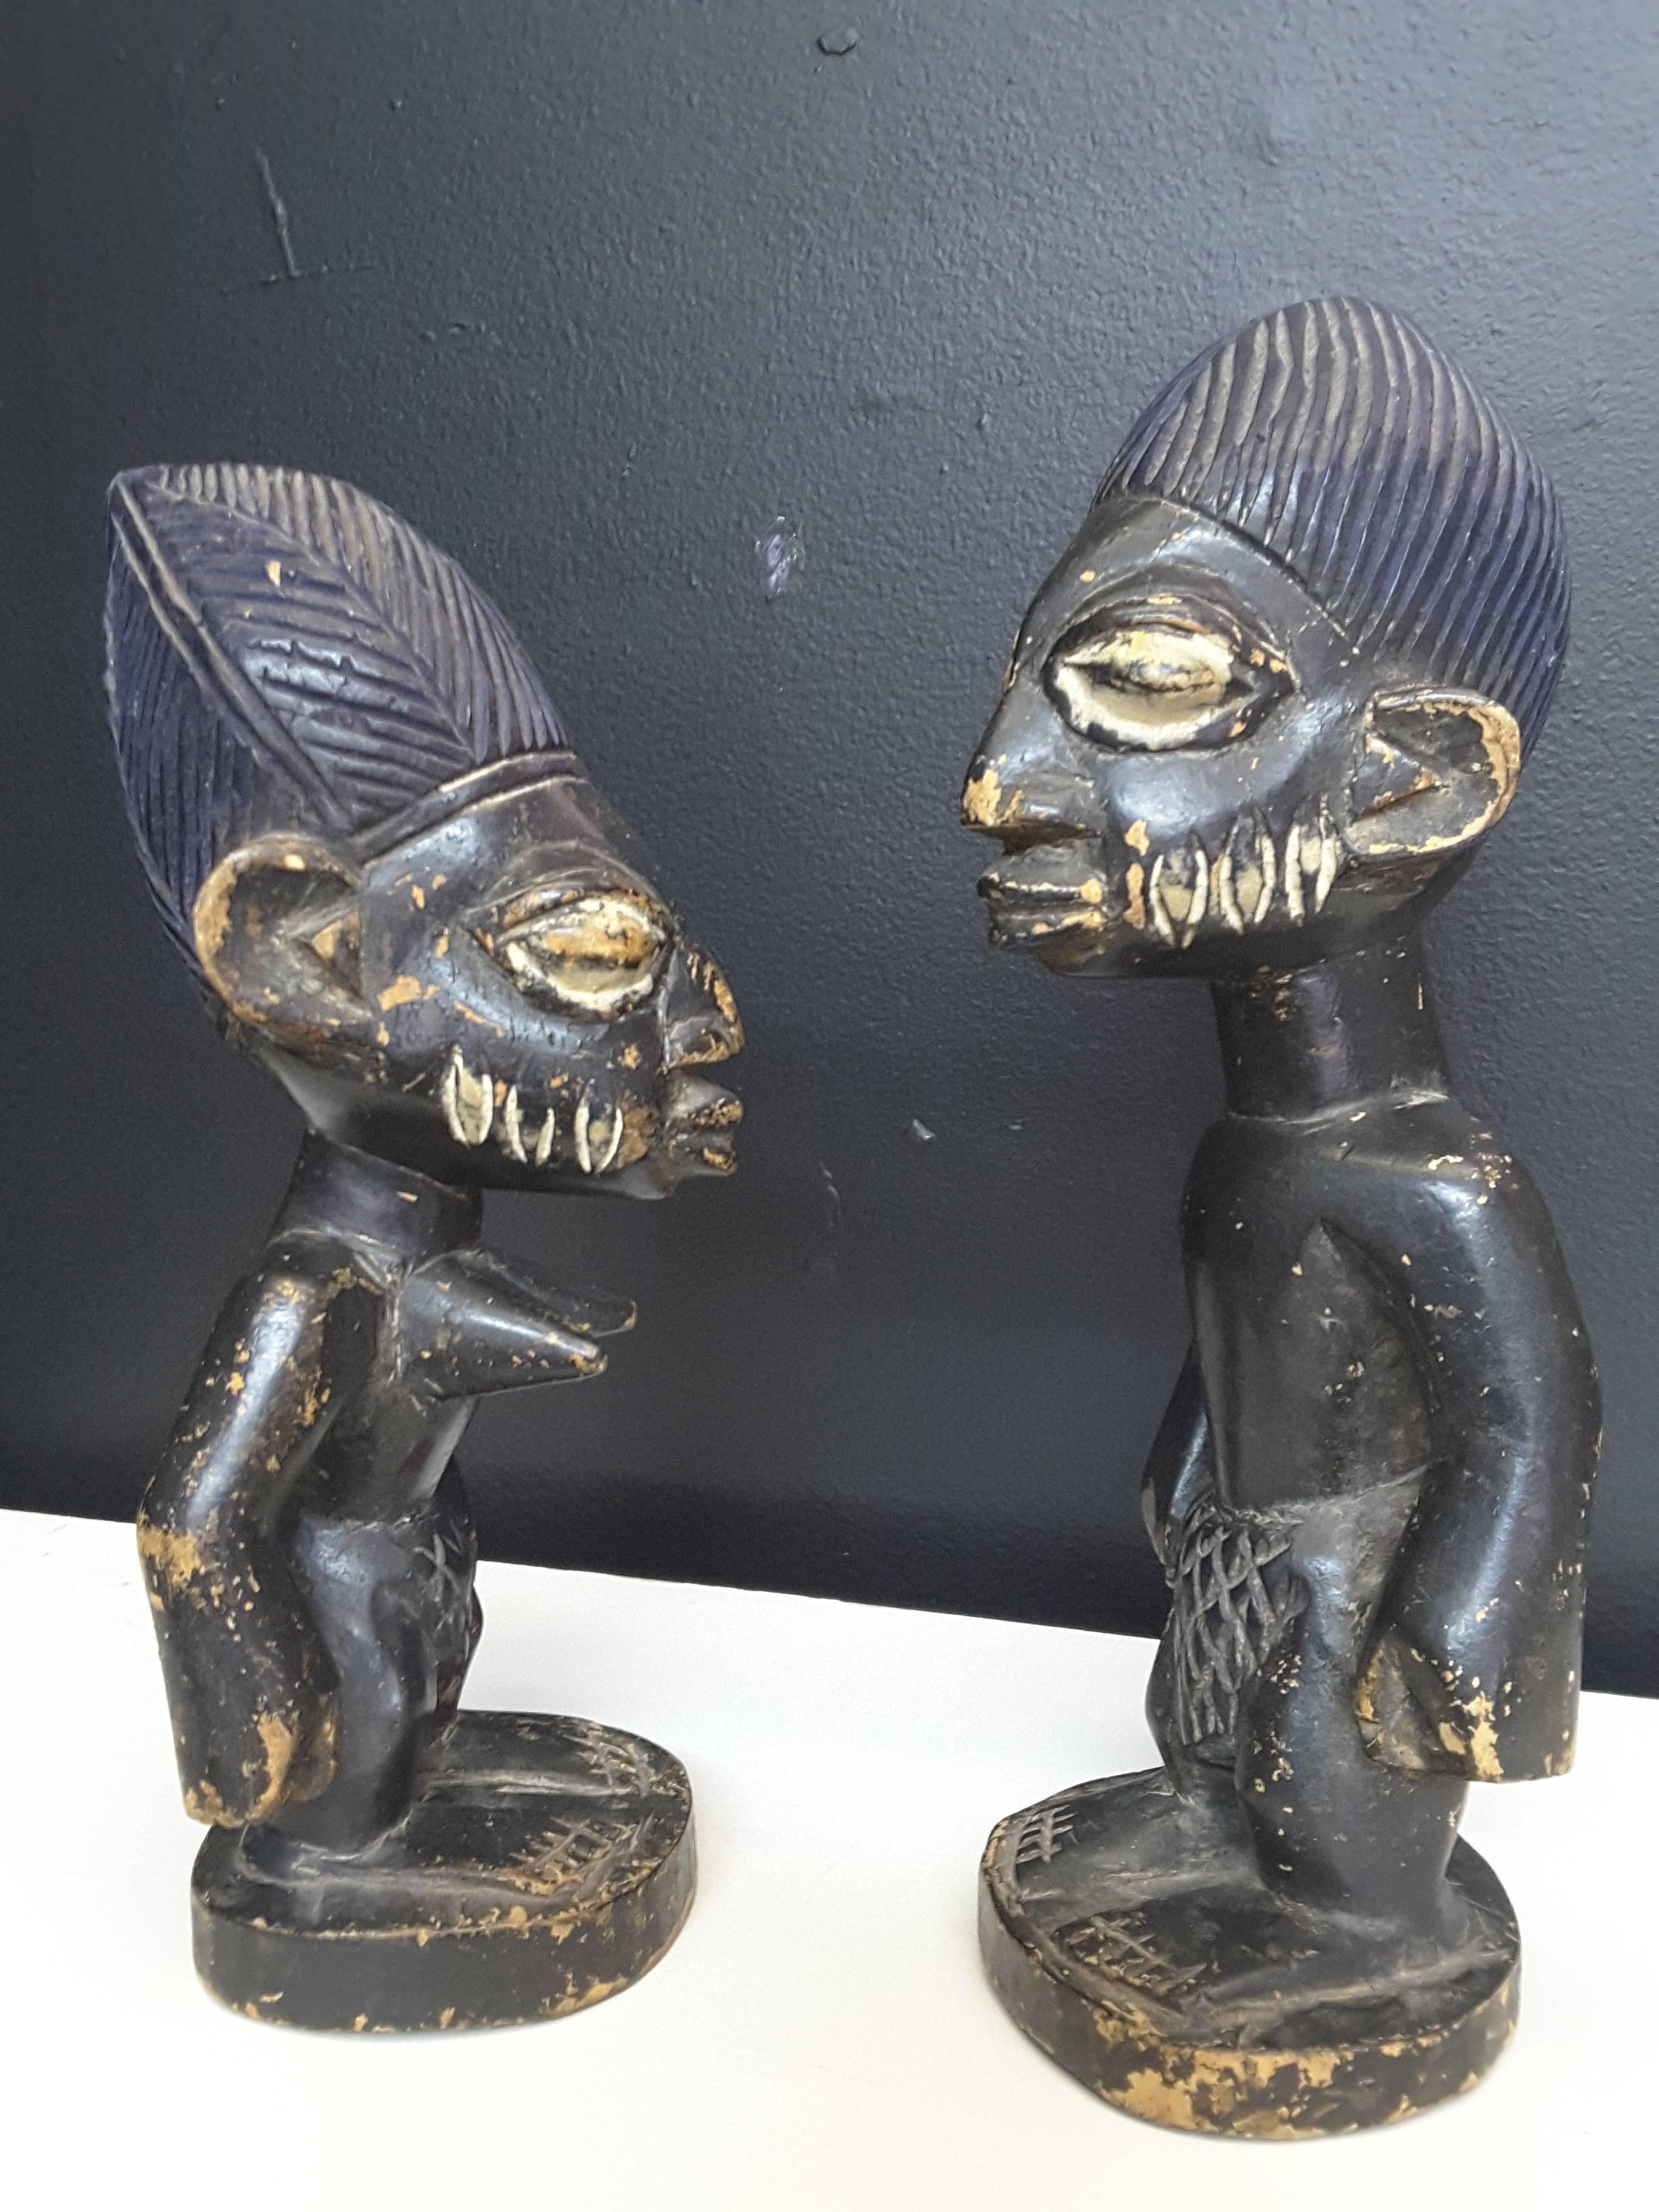 A pair of Yoruba Culture Ibeji (Nigeria) statues, a male and female carved figural statues with exaggerated features. Both figures have elongated blue headresses, frontal loin clothes, done in a dark black finish with white highlighted eyes and